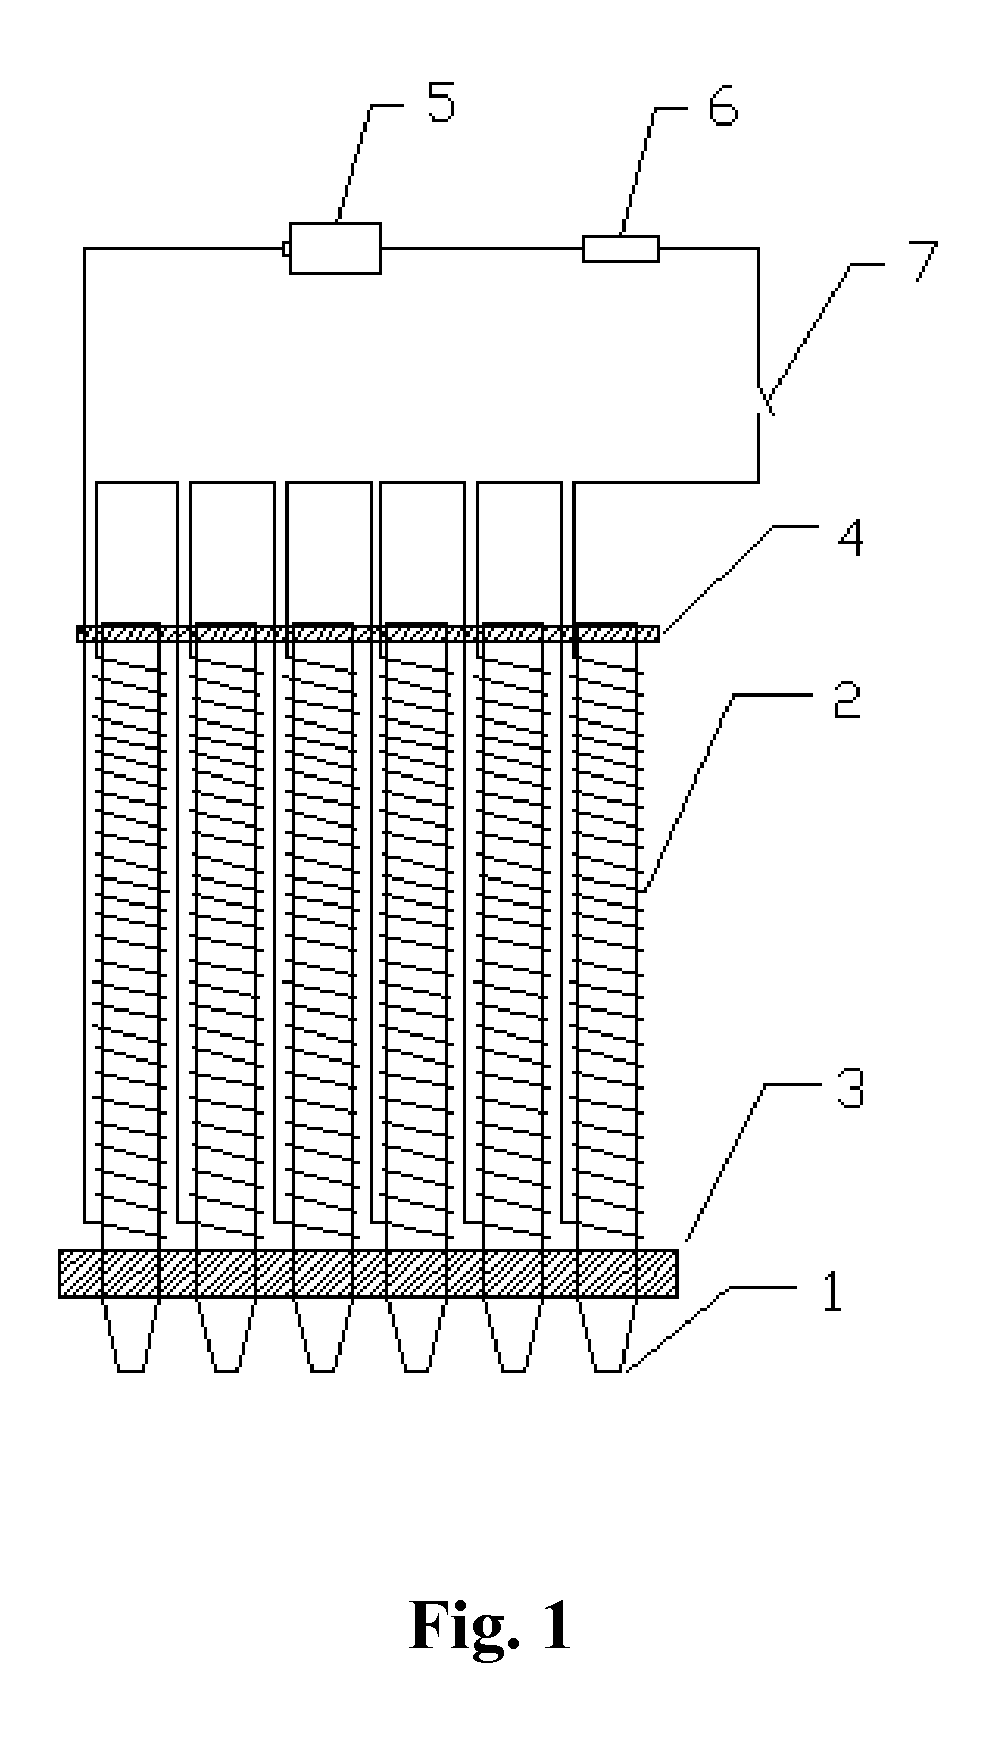 Method and equipment for making abrasive particles in even distribution, array pattern and preferred orientation